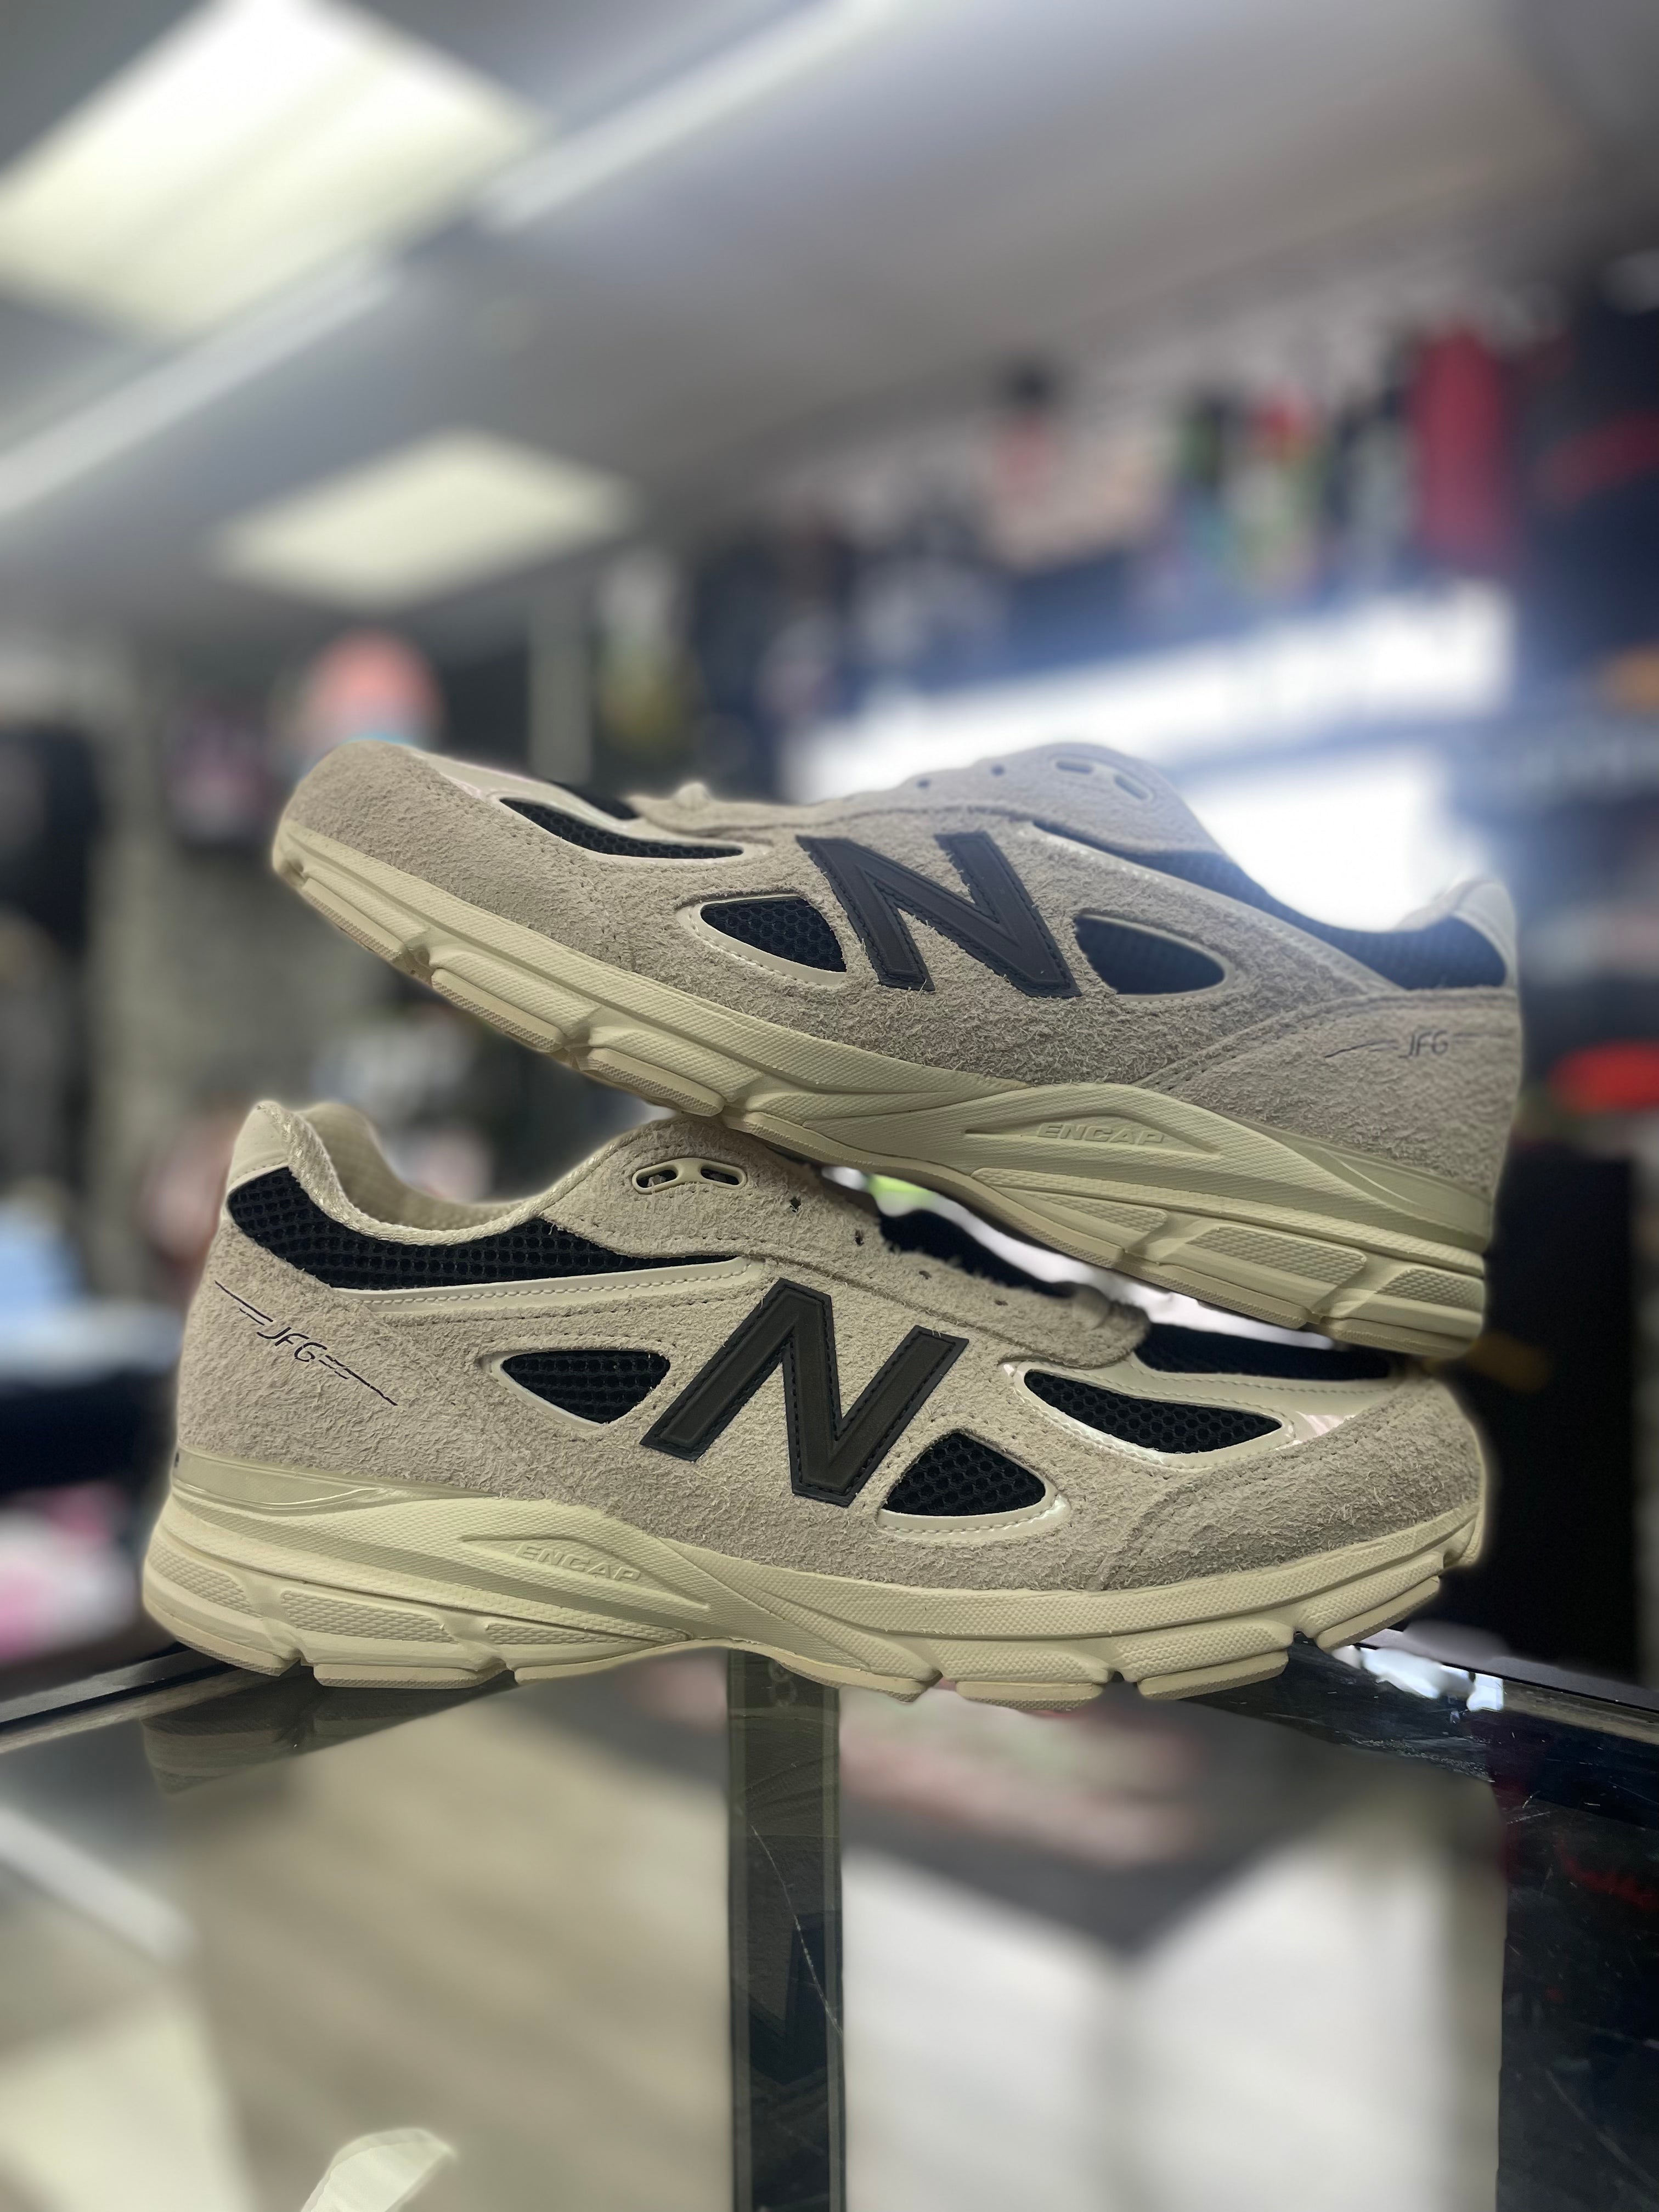 New Balance Sneakers - kicksby3y